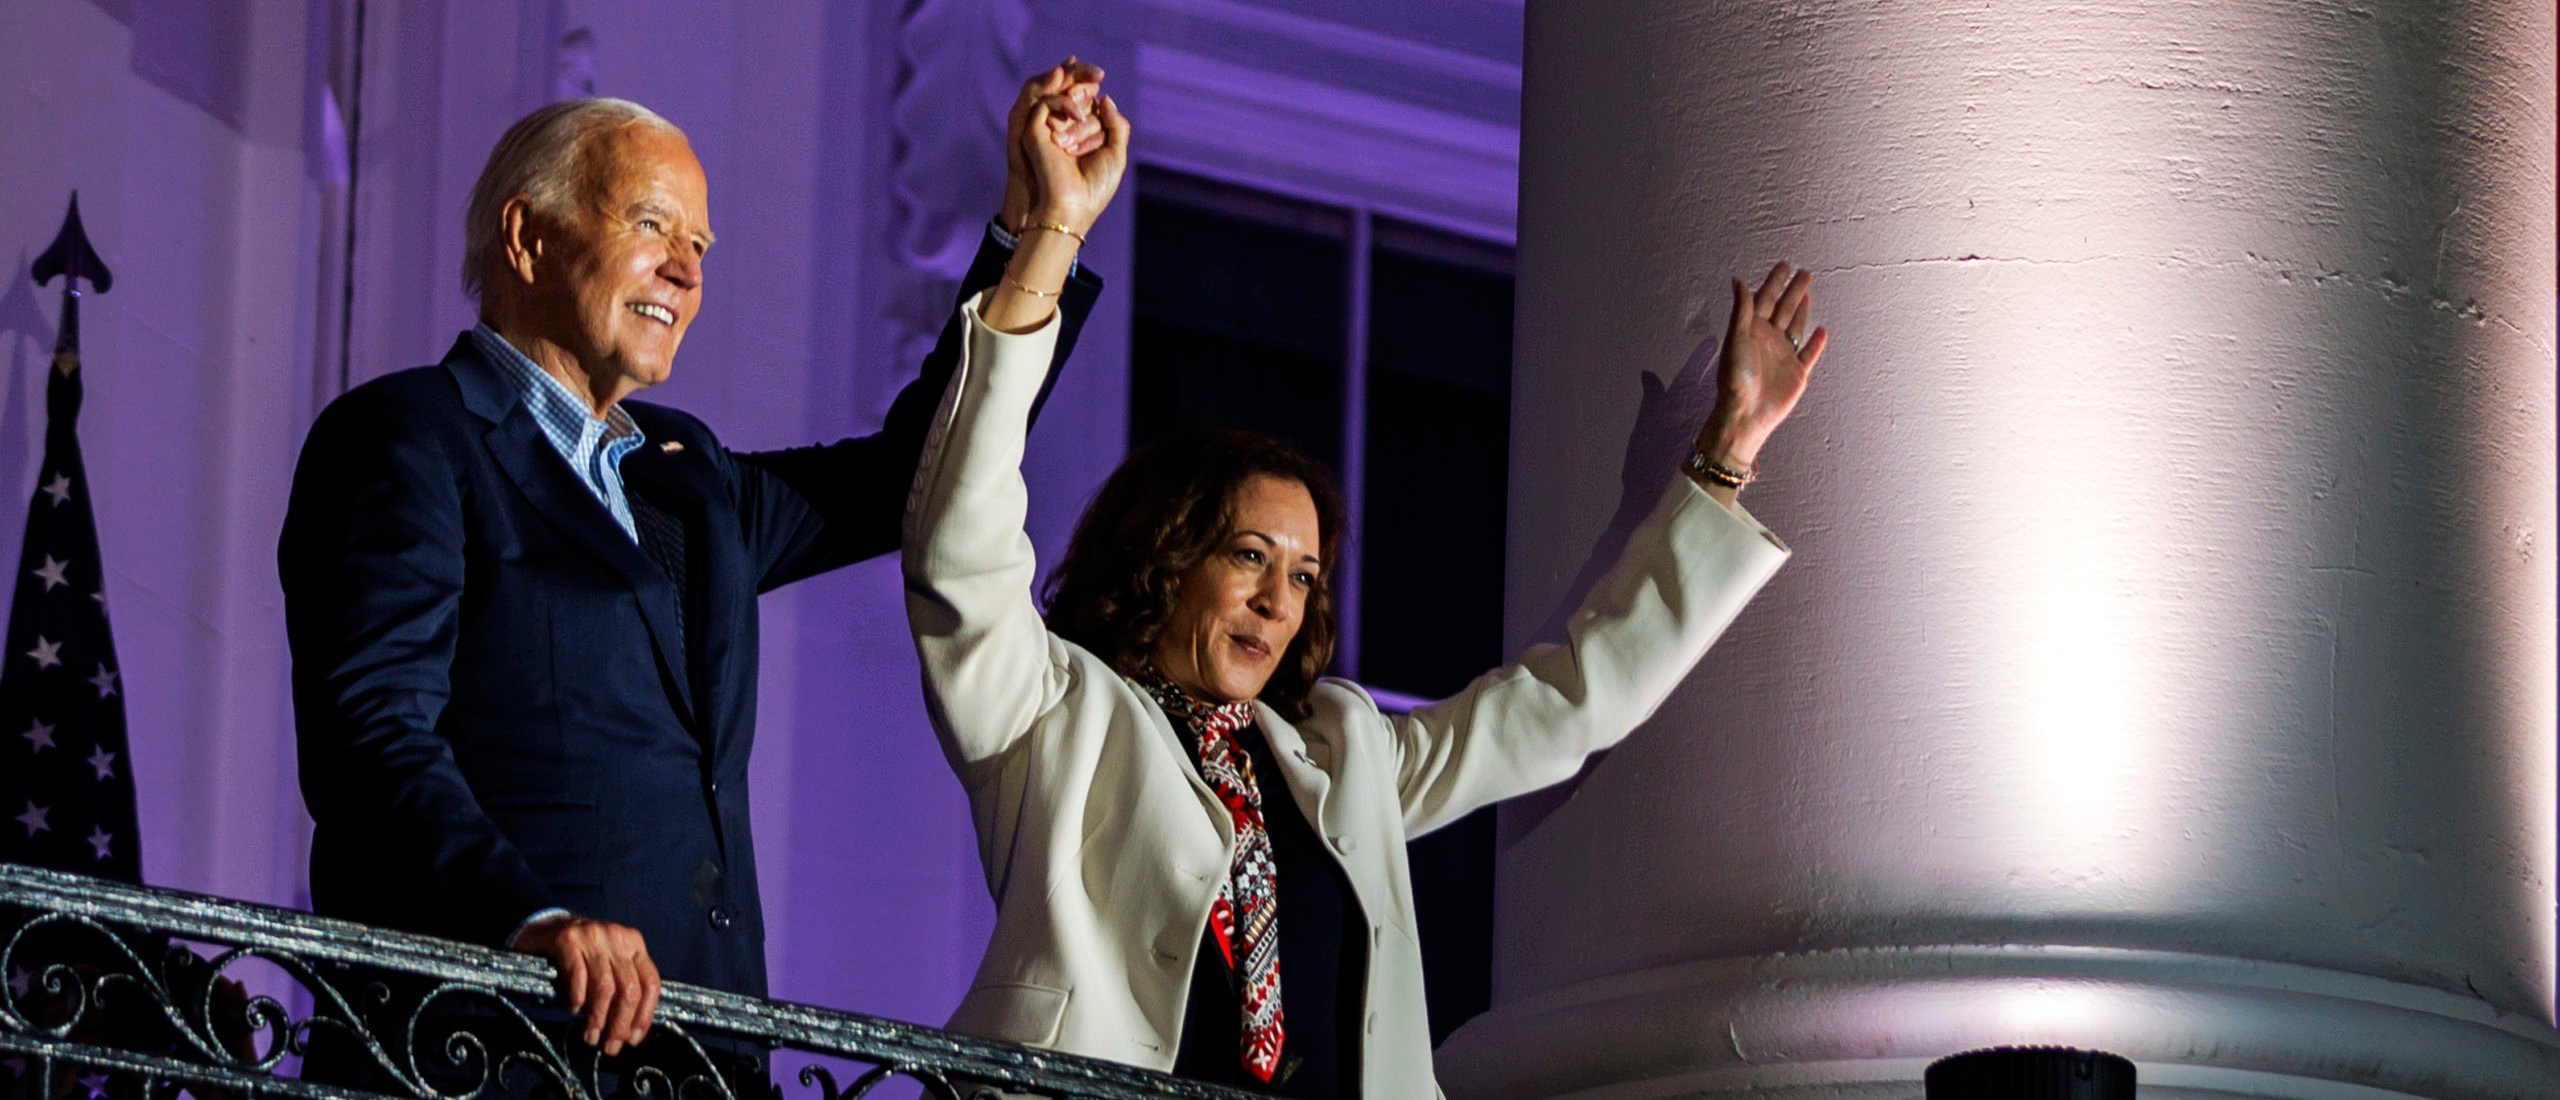 President Joe Biden and Vice President Kamala Harris join hands in the air after watching the fireworks on the National Mall with First Lady Jill Biden and Second Gentleman Doug Emhoff from the White House balcony during a 4th of July event on the South Lawn of the White House on July 4, 2024 in Washington, DC. The President is hosting the Independence Day event for members of the military and their families. (Photo by Samuel Corum/Getty Images)